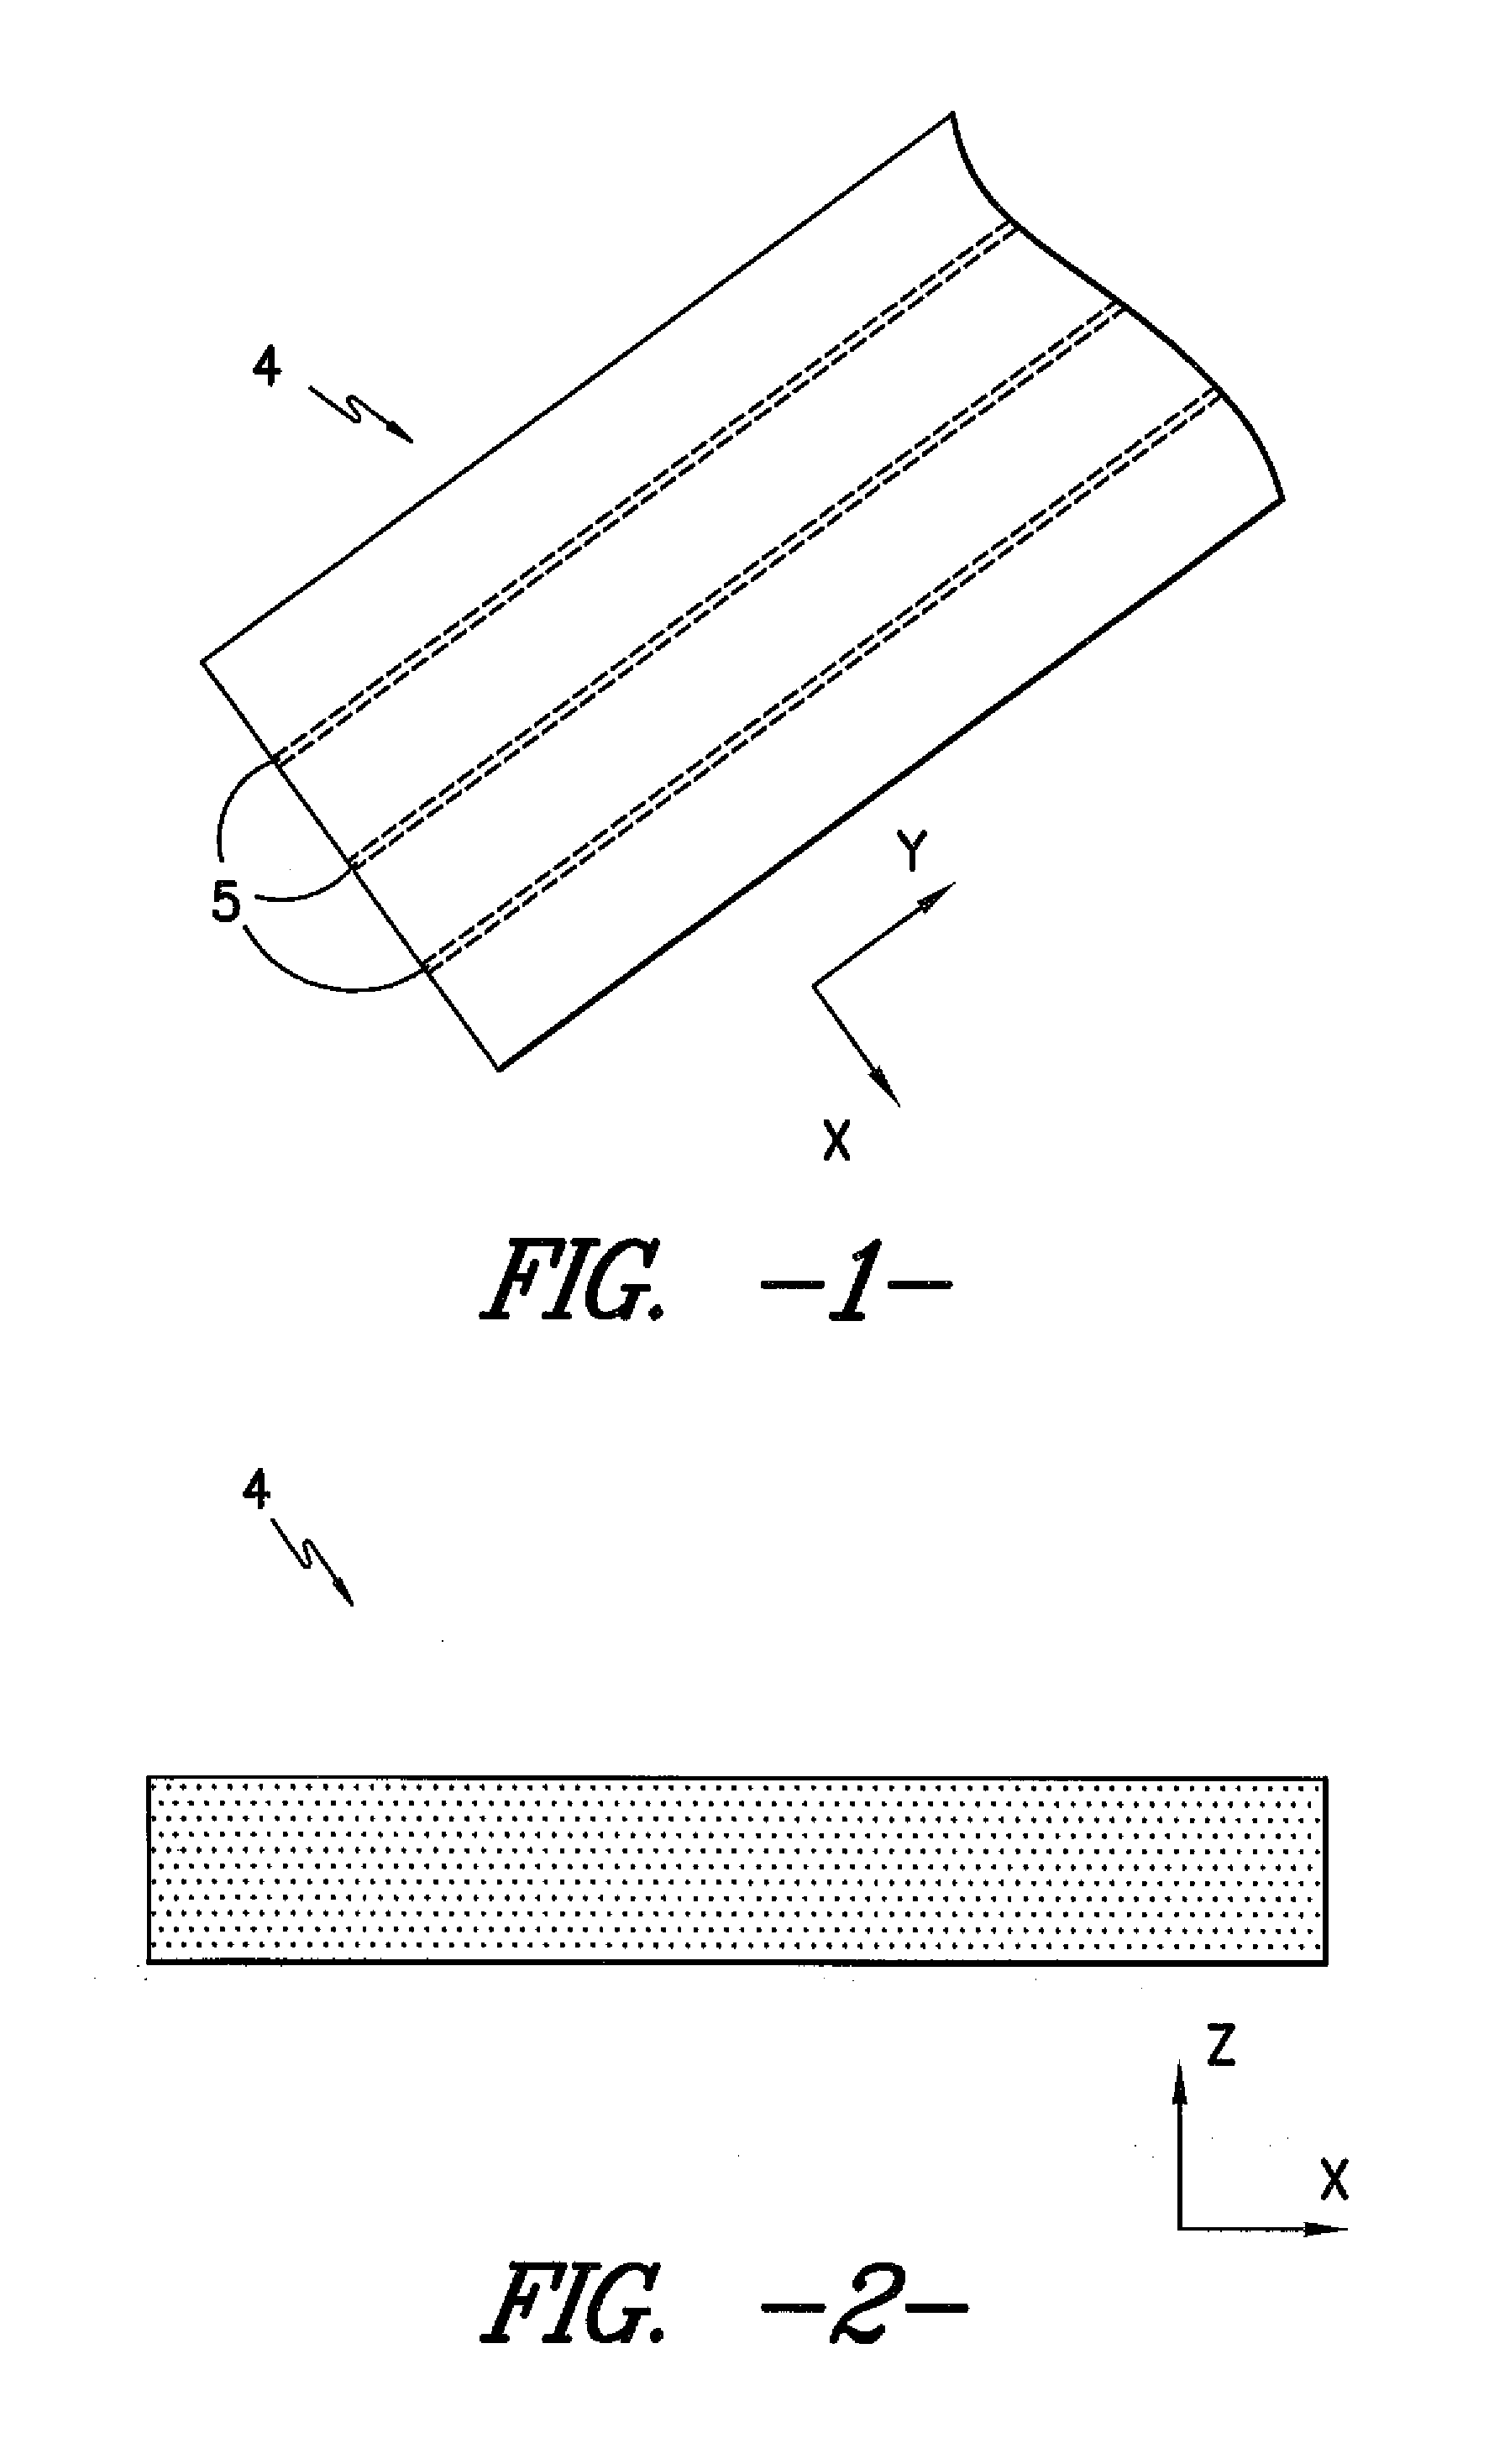 Composite Core for Electrical Transmission Cables